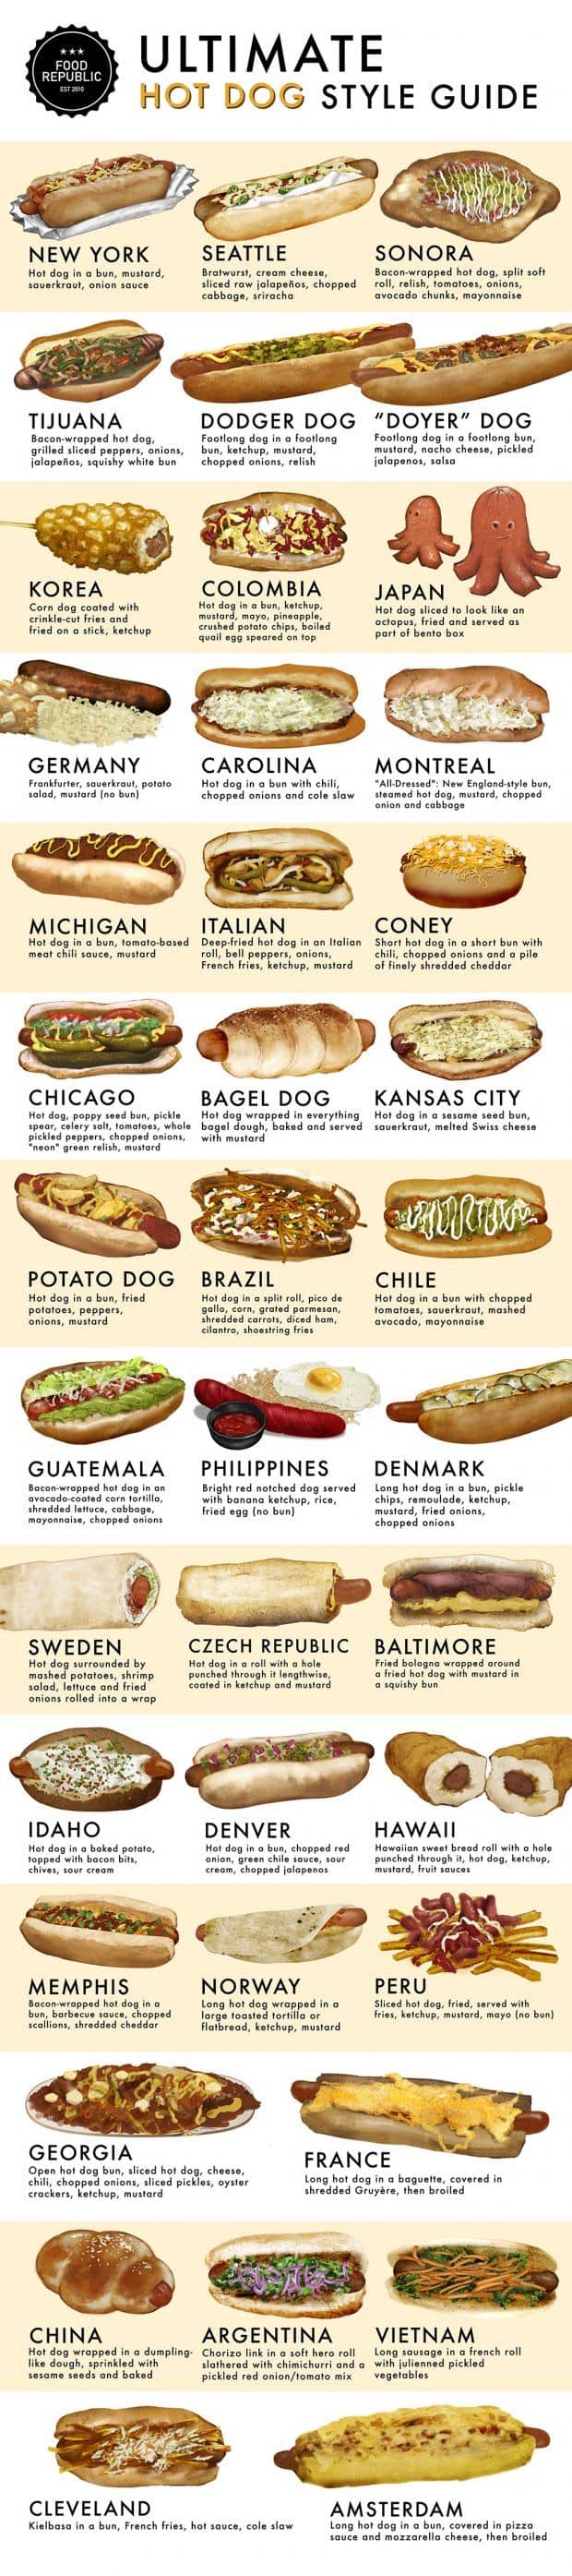 40 hot dog variations from all over the world